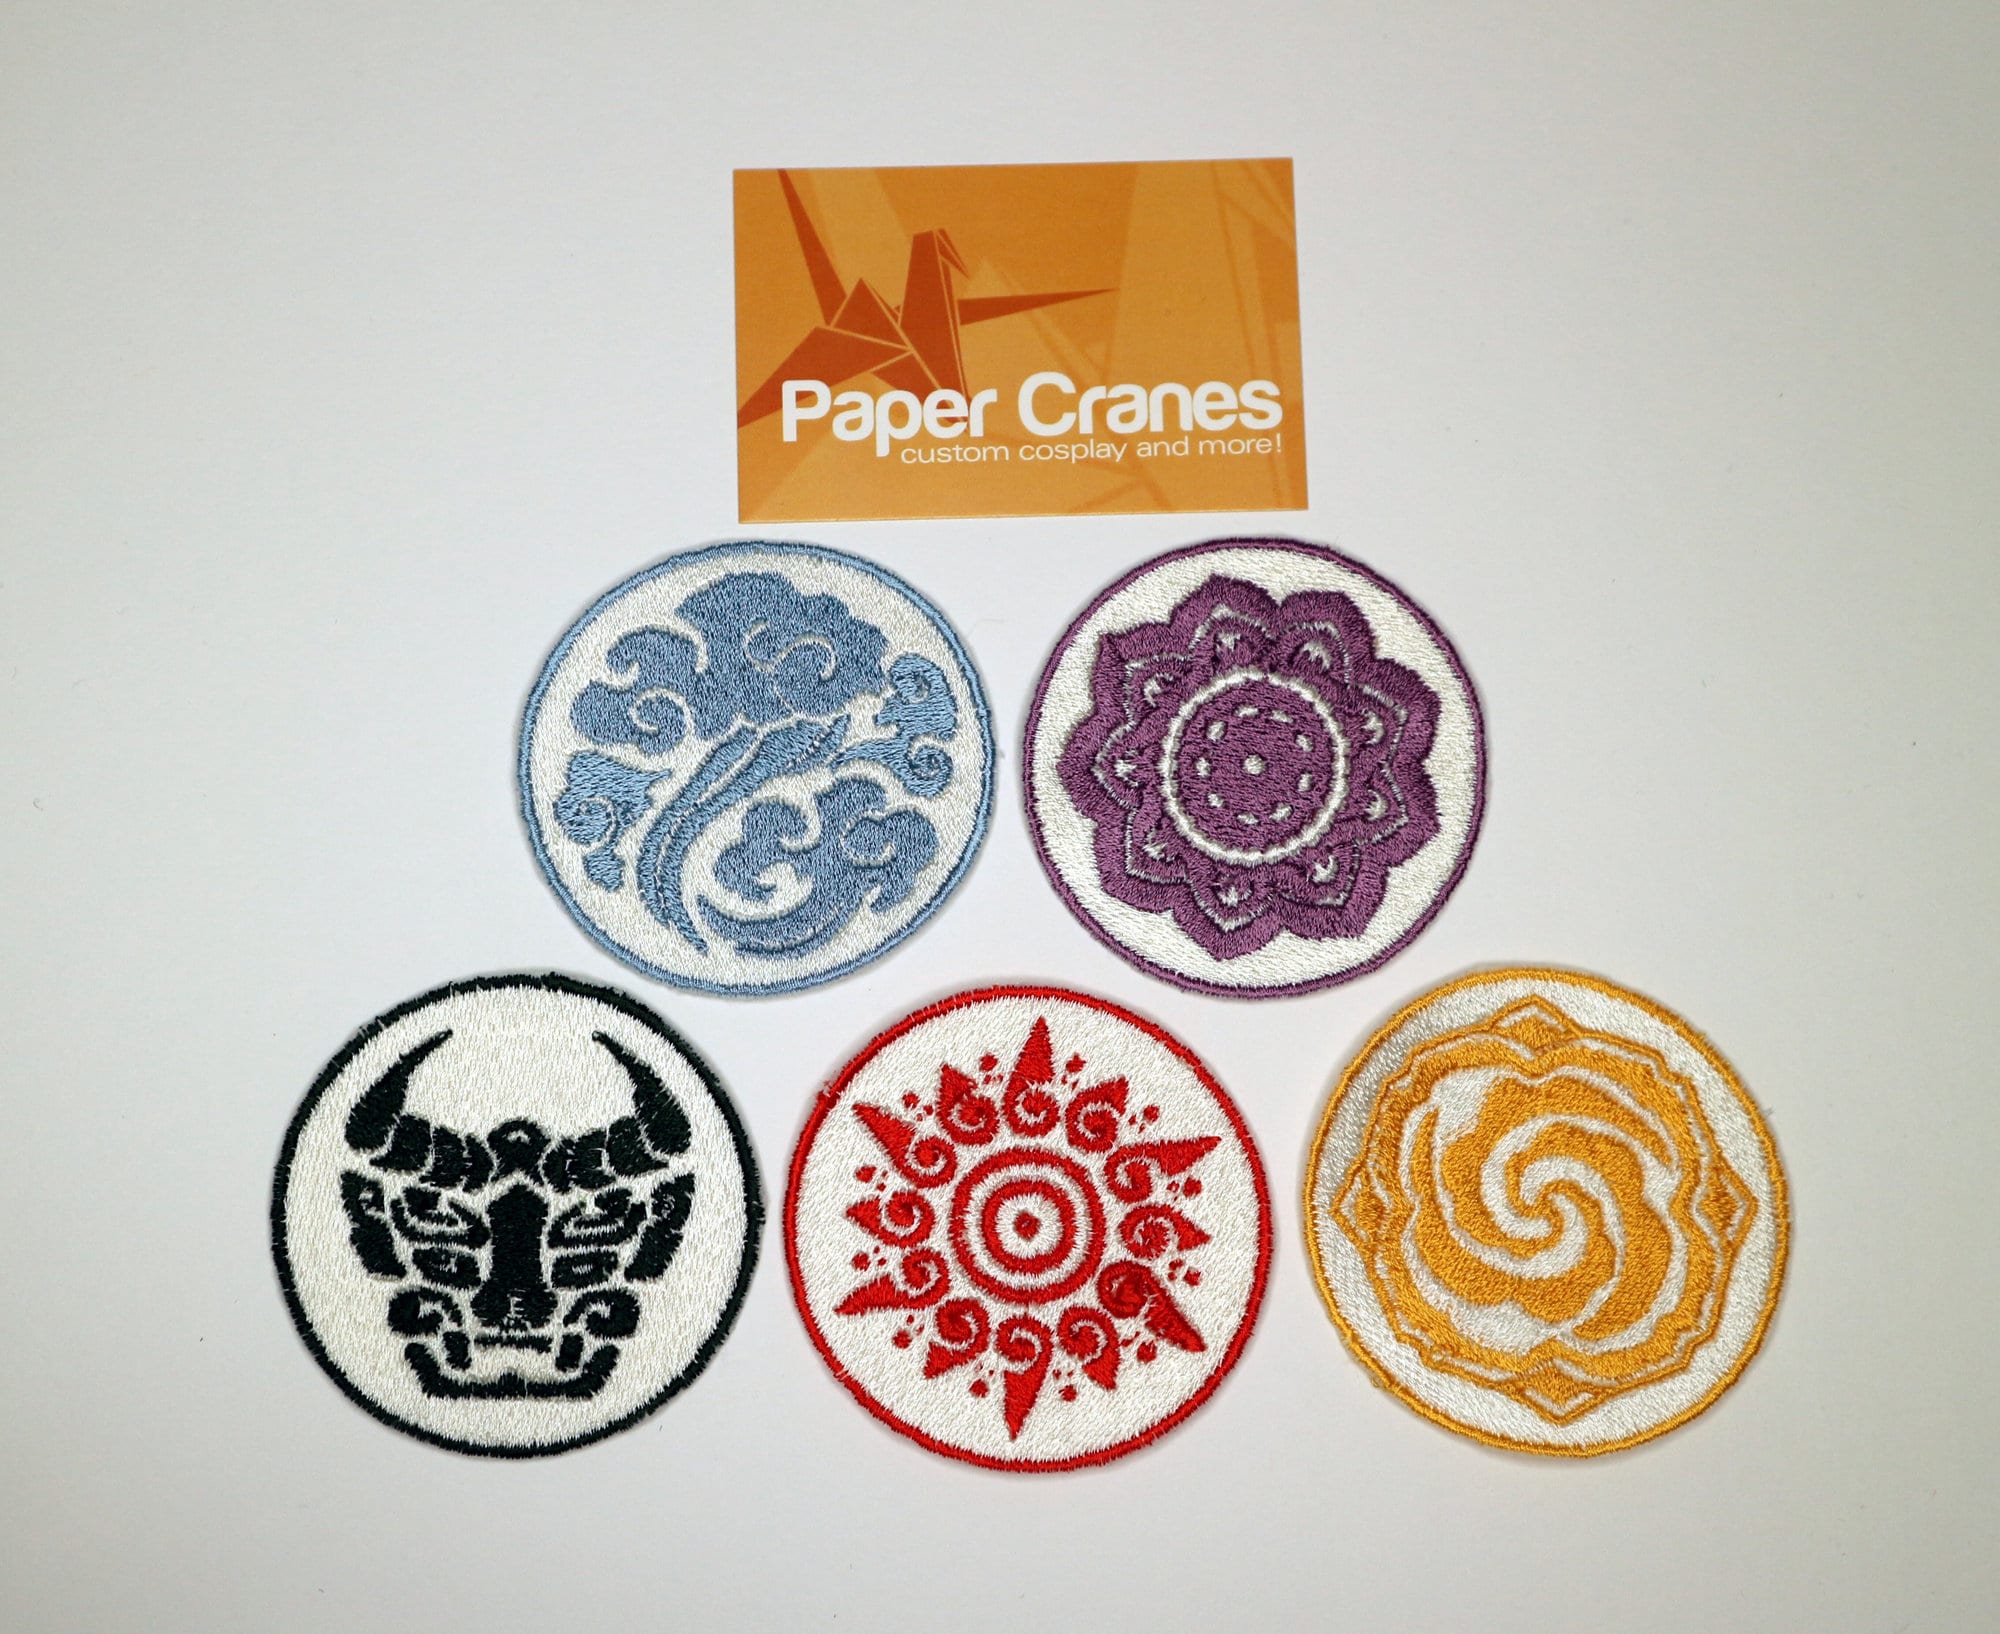 Grand Master Stickers for Sale